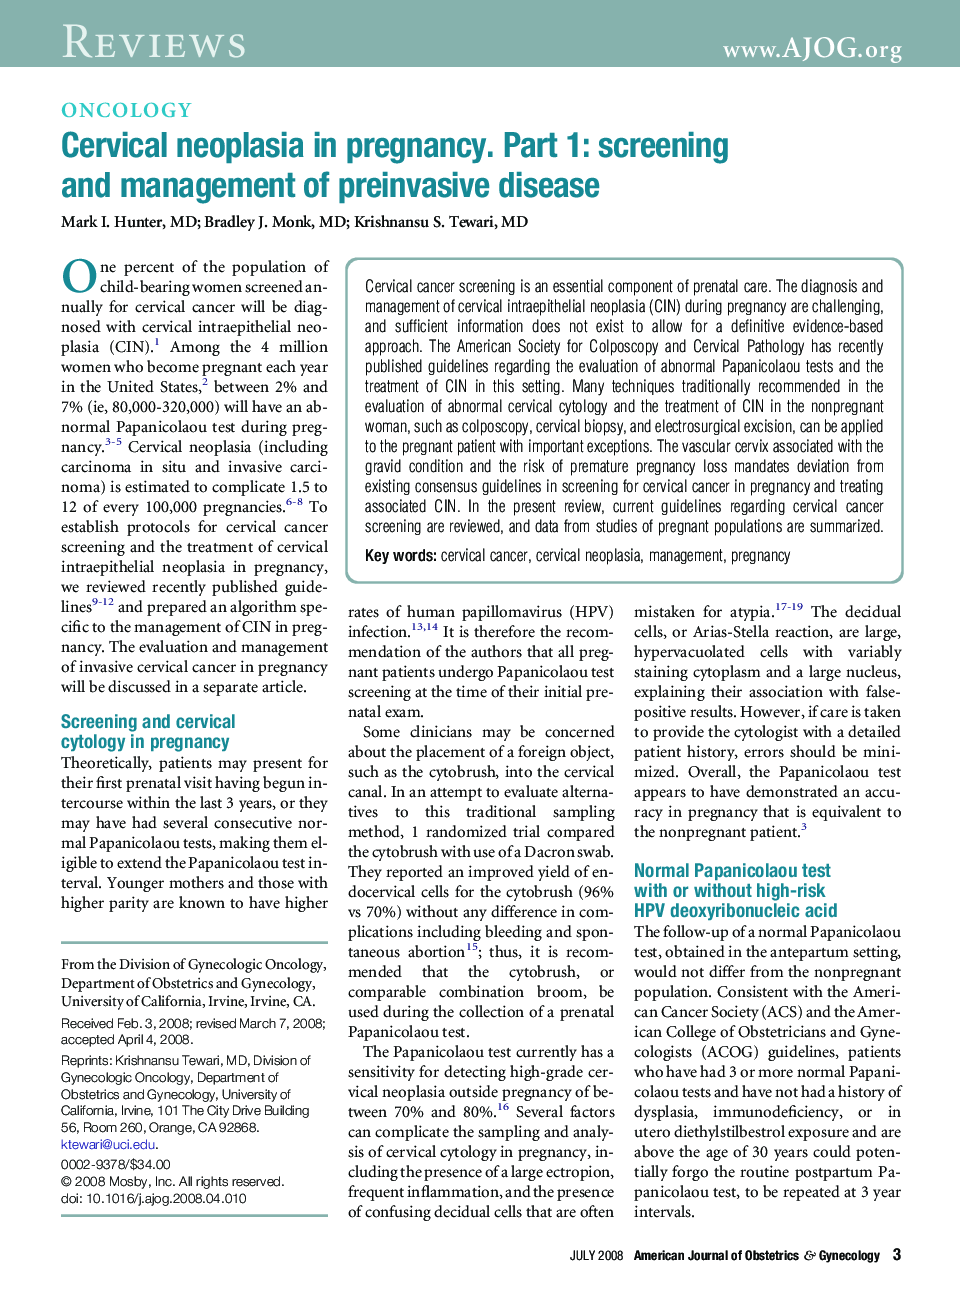 Cervical neoplasia in pregnancy. Part 1: screening and management of preinvasive disease